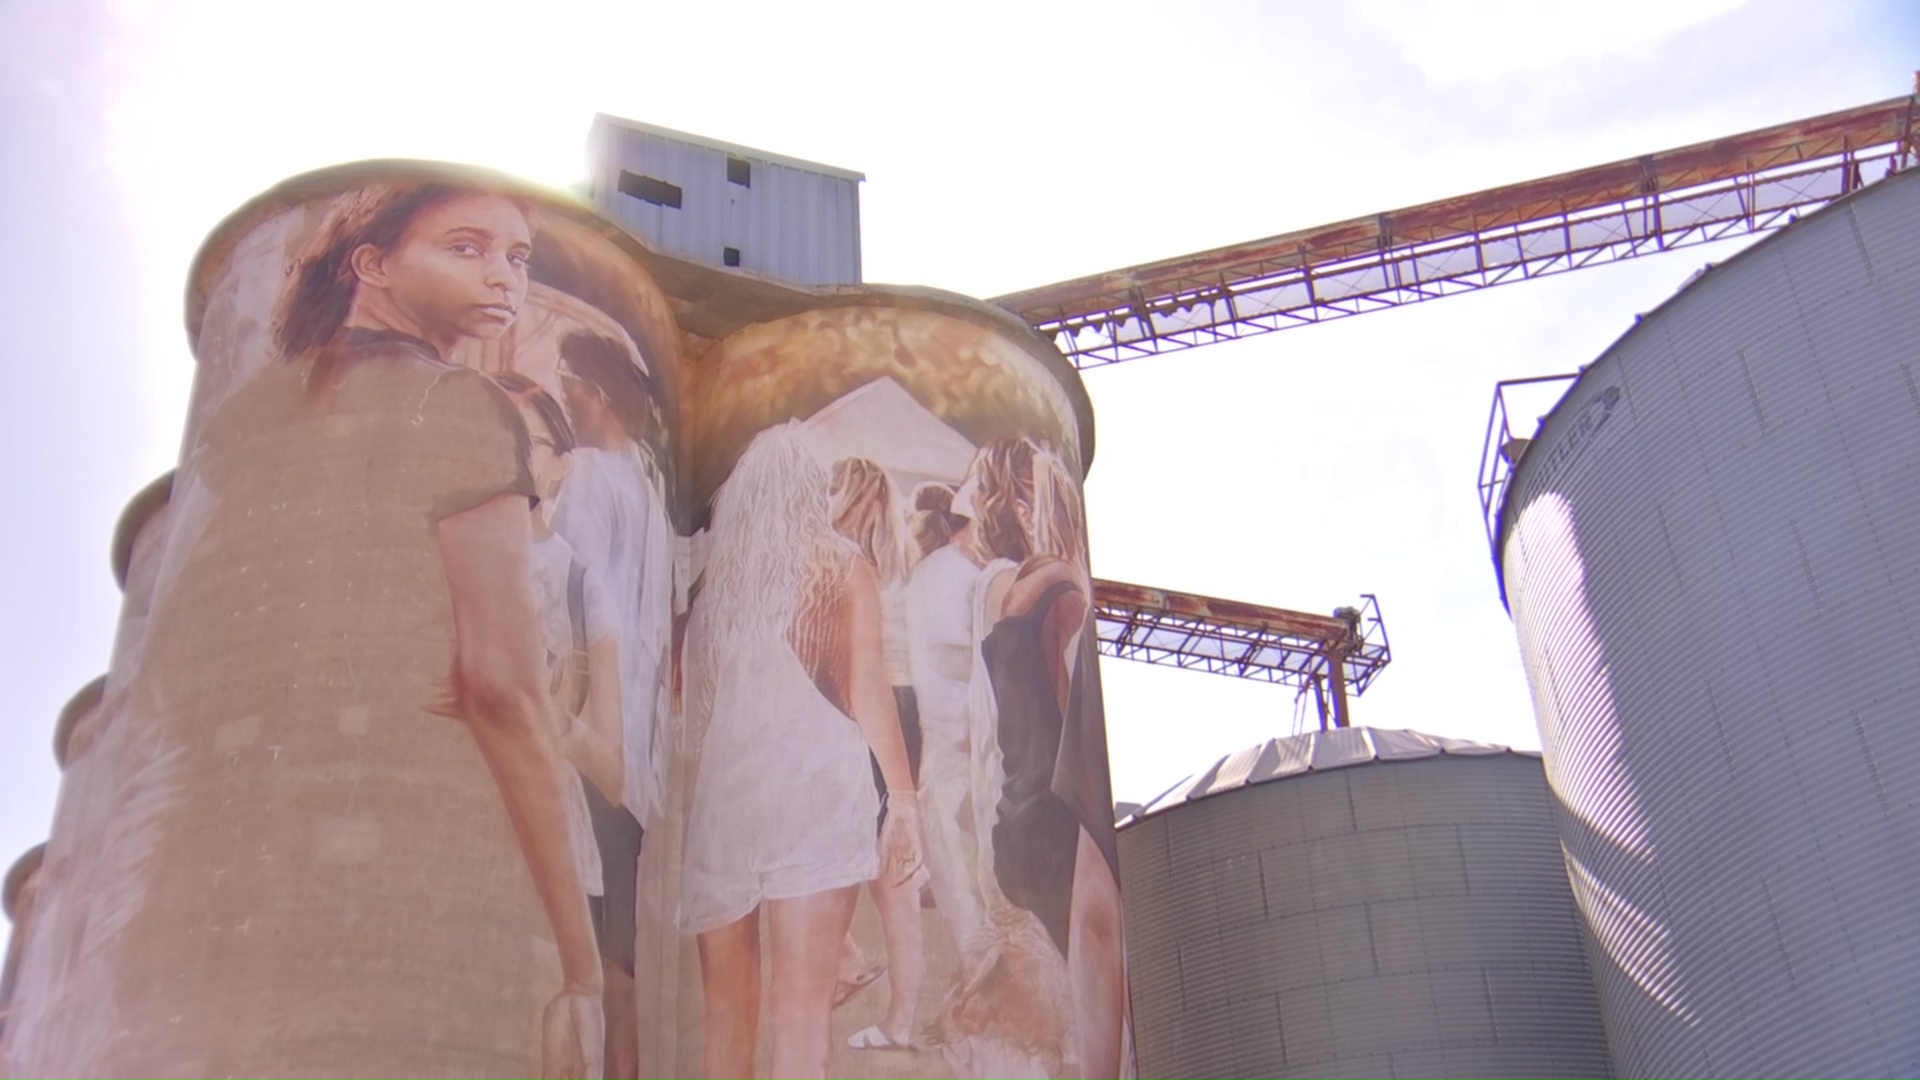 A Texas town gets its portrait on a silo